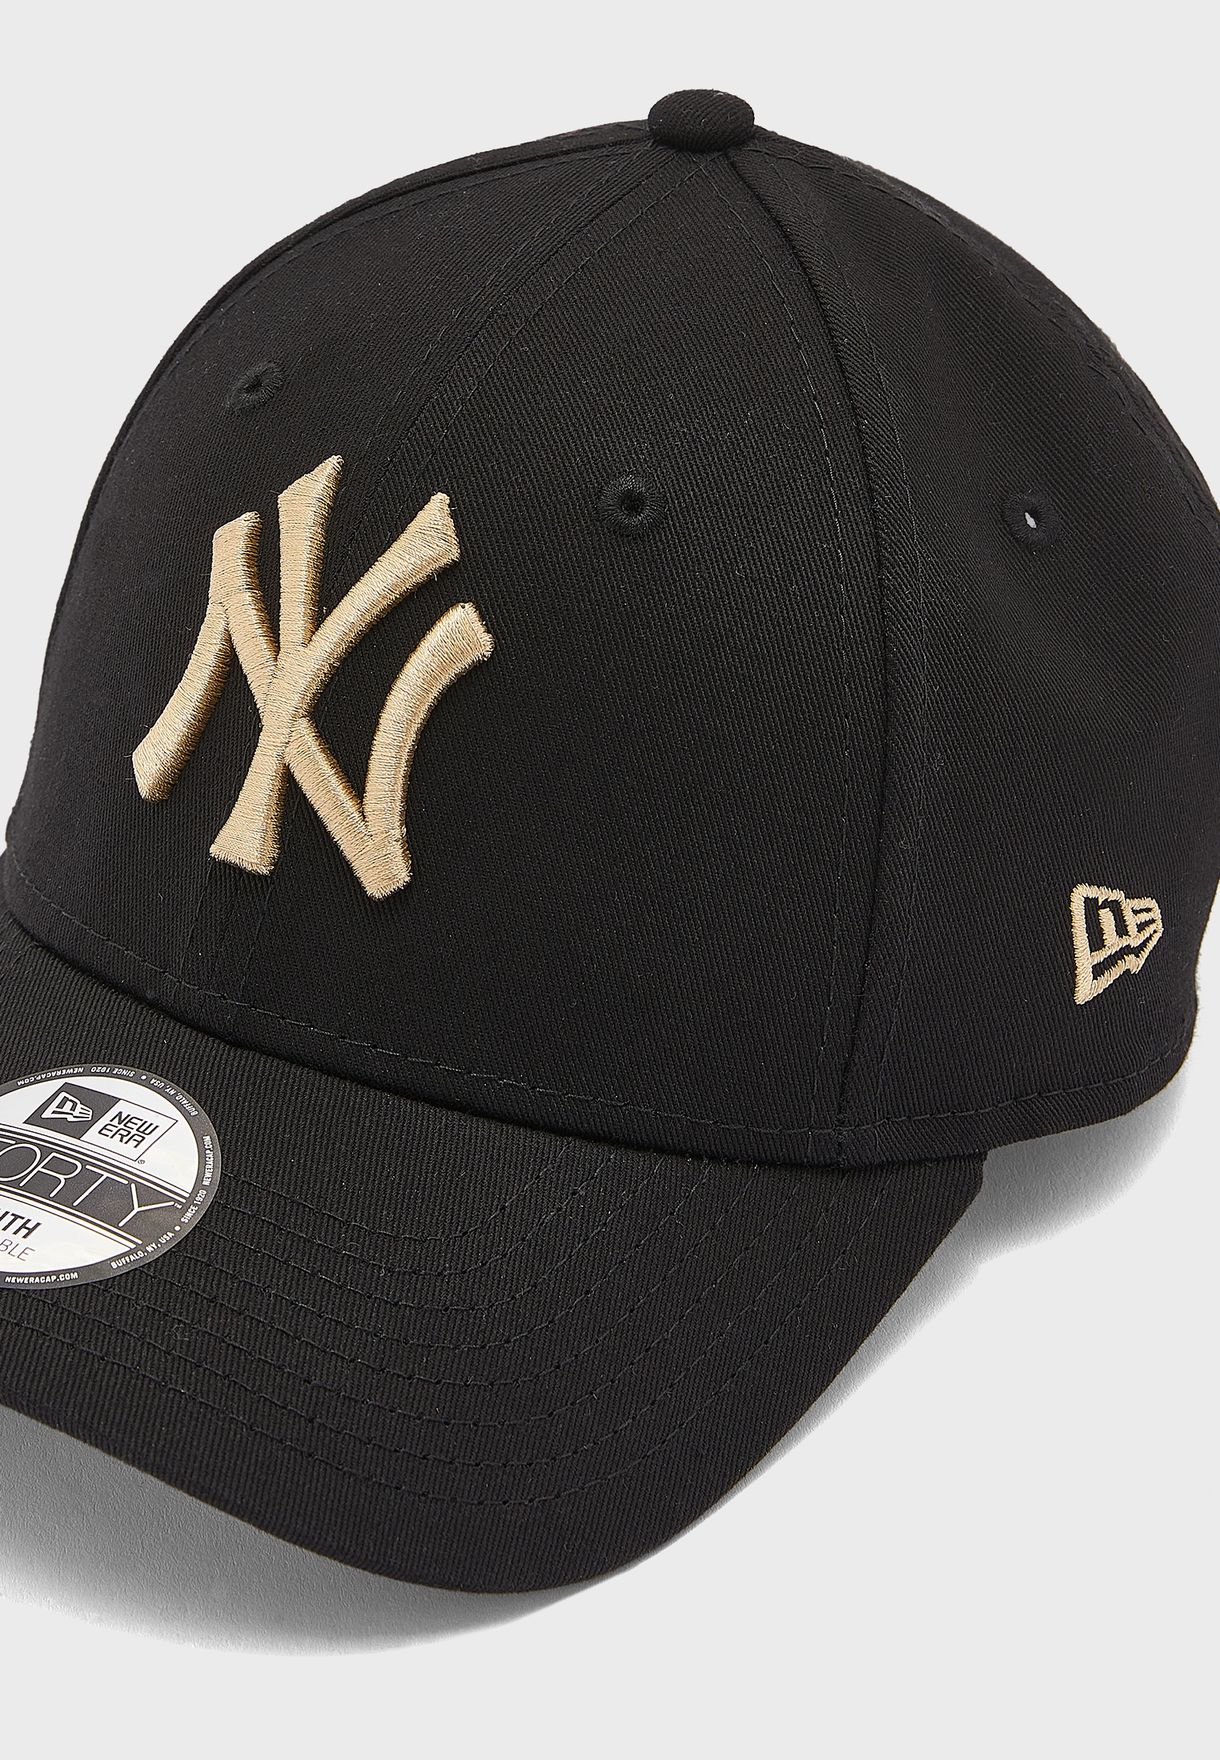 Youth 9Forty New York Yankees League Essential Cap